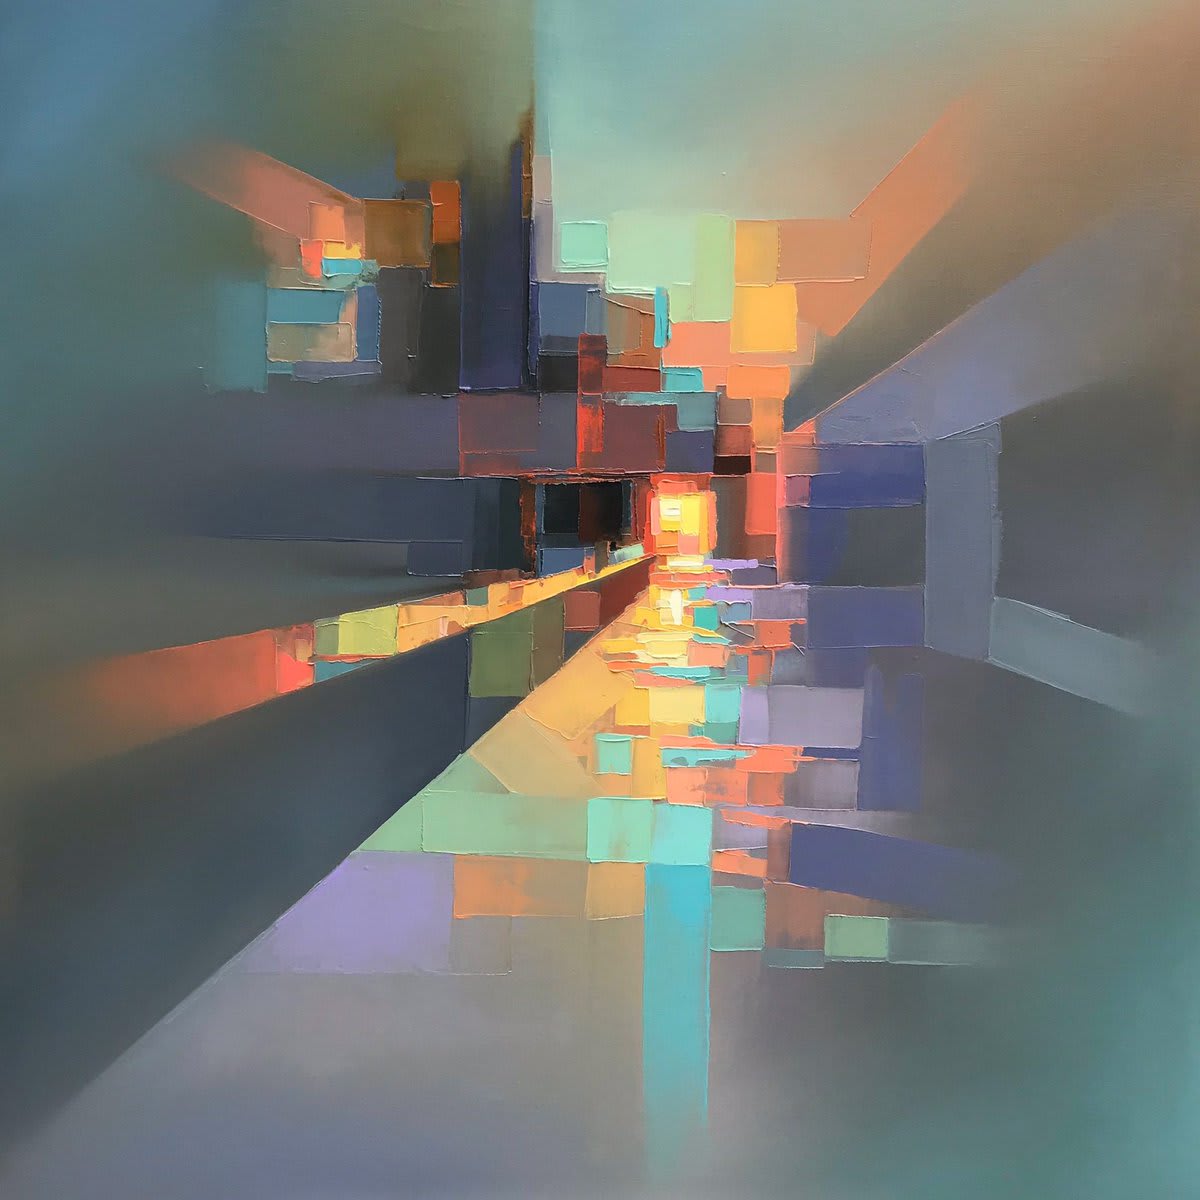 Landscapes by Jason Anderson blend precise pixelation and hazy abstraction